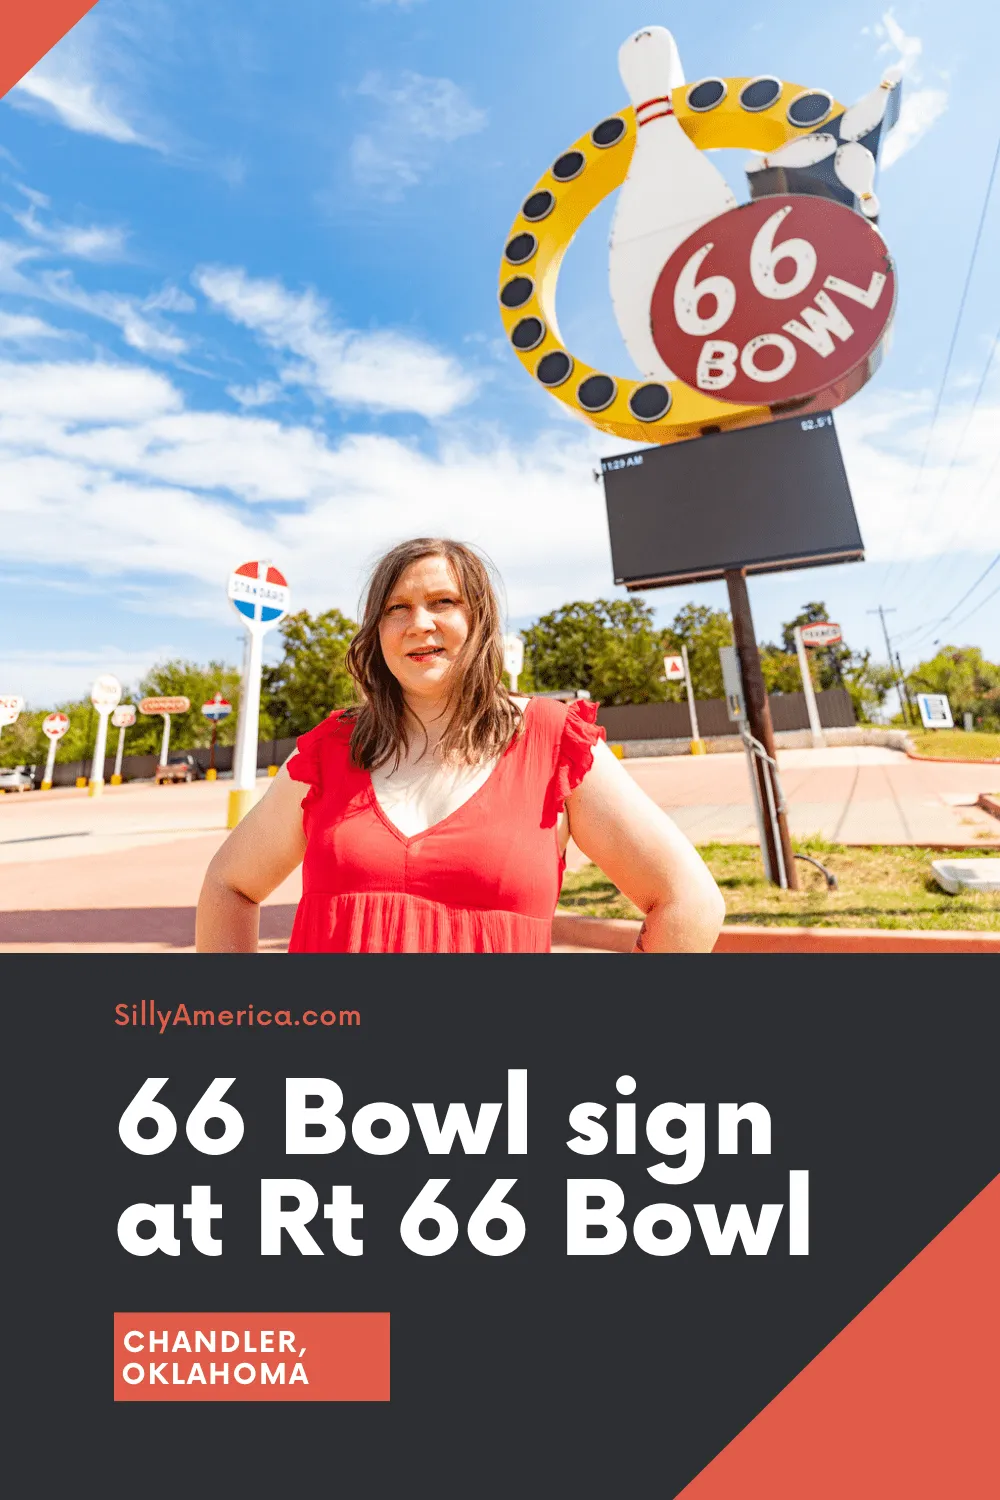 You'll be bowled over by this Route 66 attraction. Rt 66 Bowl in Chandler, Oklahoma has entertainment for all with nostalgia to spare. Just look for the 66 Bowl neon sign out front.  #RoadTrips #RoadTripStop #Route66 #Route66RoadTrip #IllinoisRoute66 #Illinois #IllinoisRoadTrip #IllinoisRoadsideAttractions #RoadsideAttractions #RoadsideAttraction #RoadsideAmerica #RoadTrip